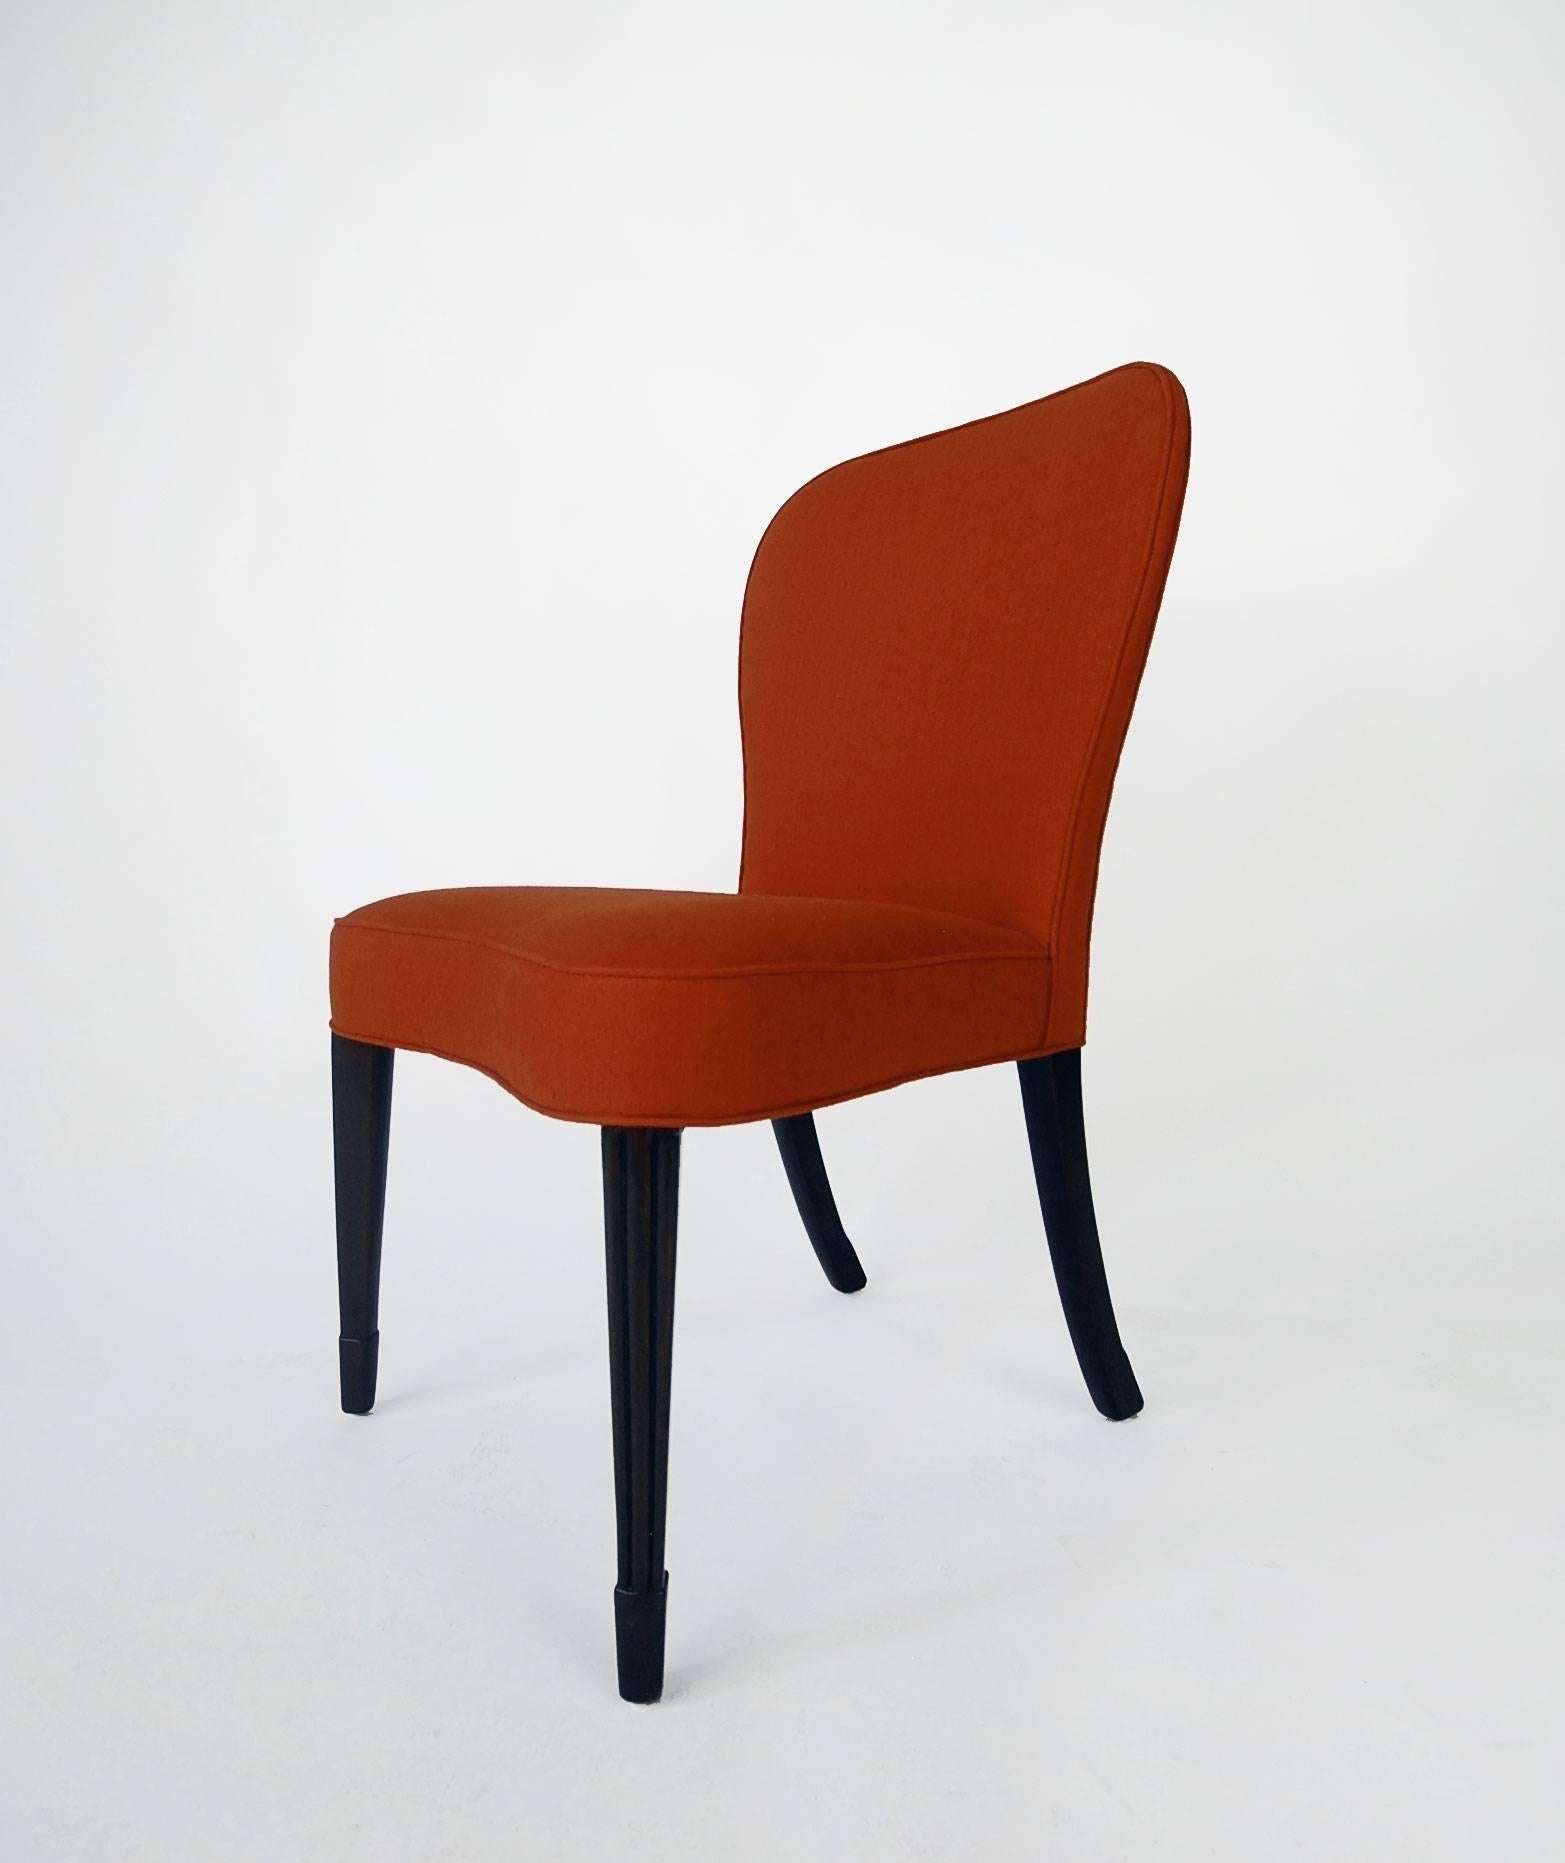 Chair designed by Edward Wormley, for Dunbar, circa 1956. Newly reupholstered in a saffron red linen. Brand new strapping, foam and fabric. A beautifully designed chair with fluted front legs.